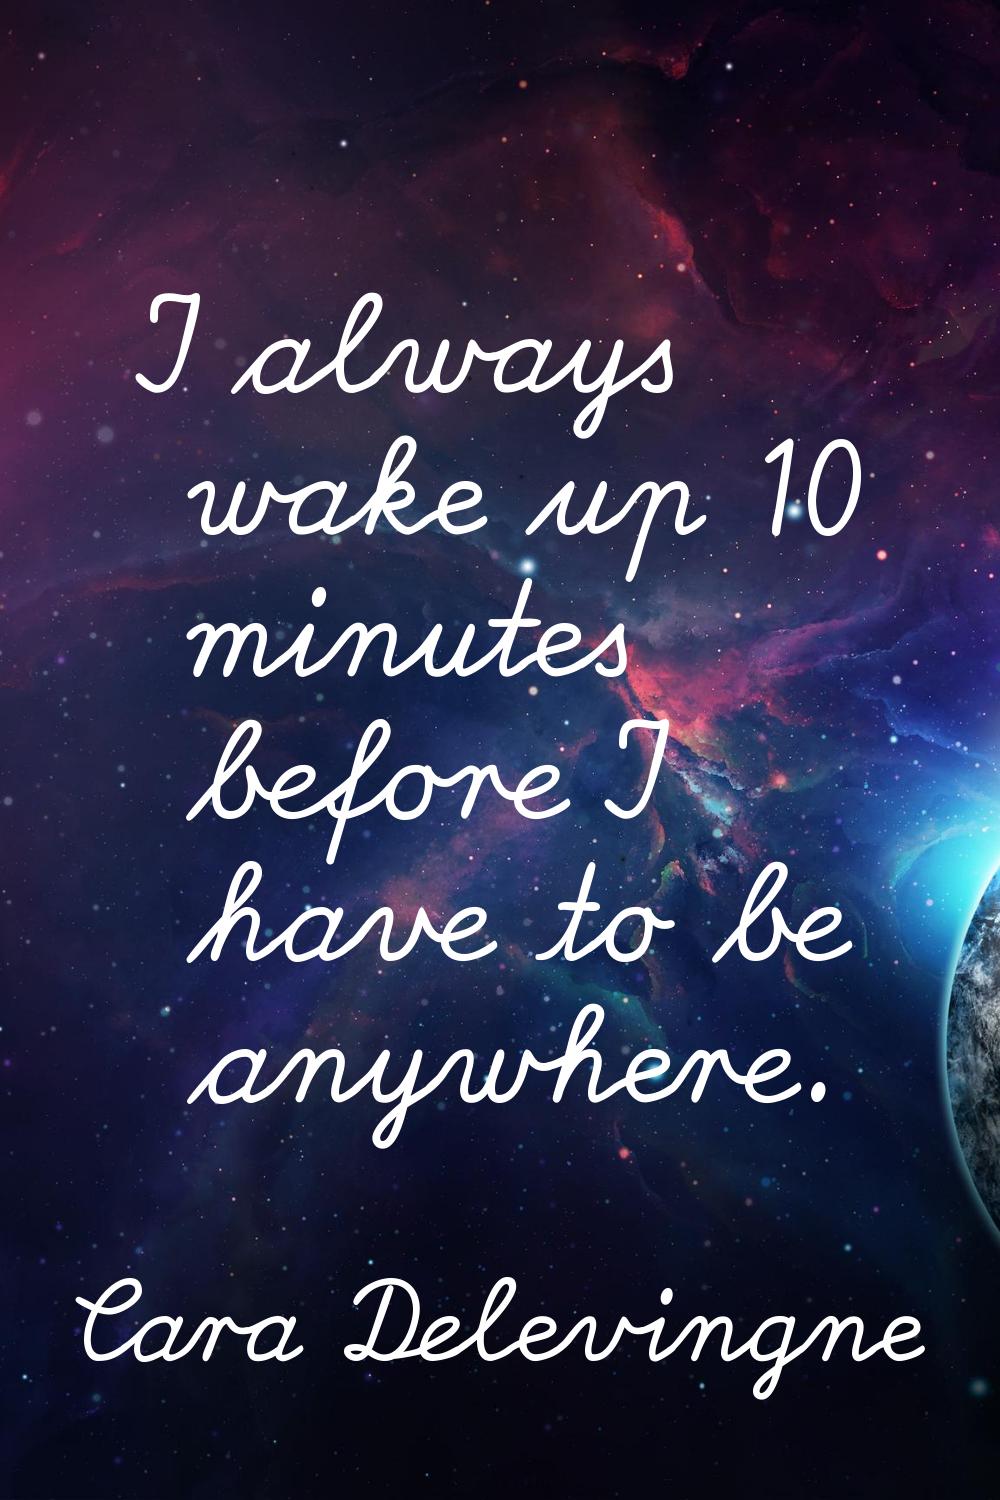 I always wake up 10 minutes before I have to be anywhere.